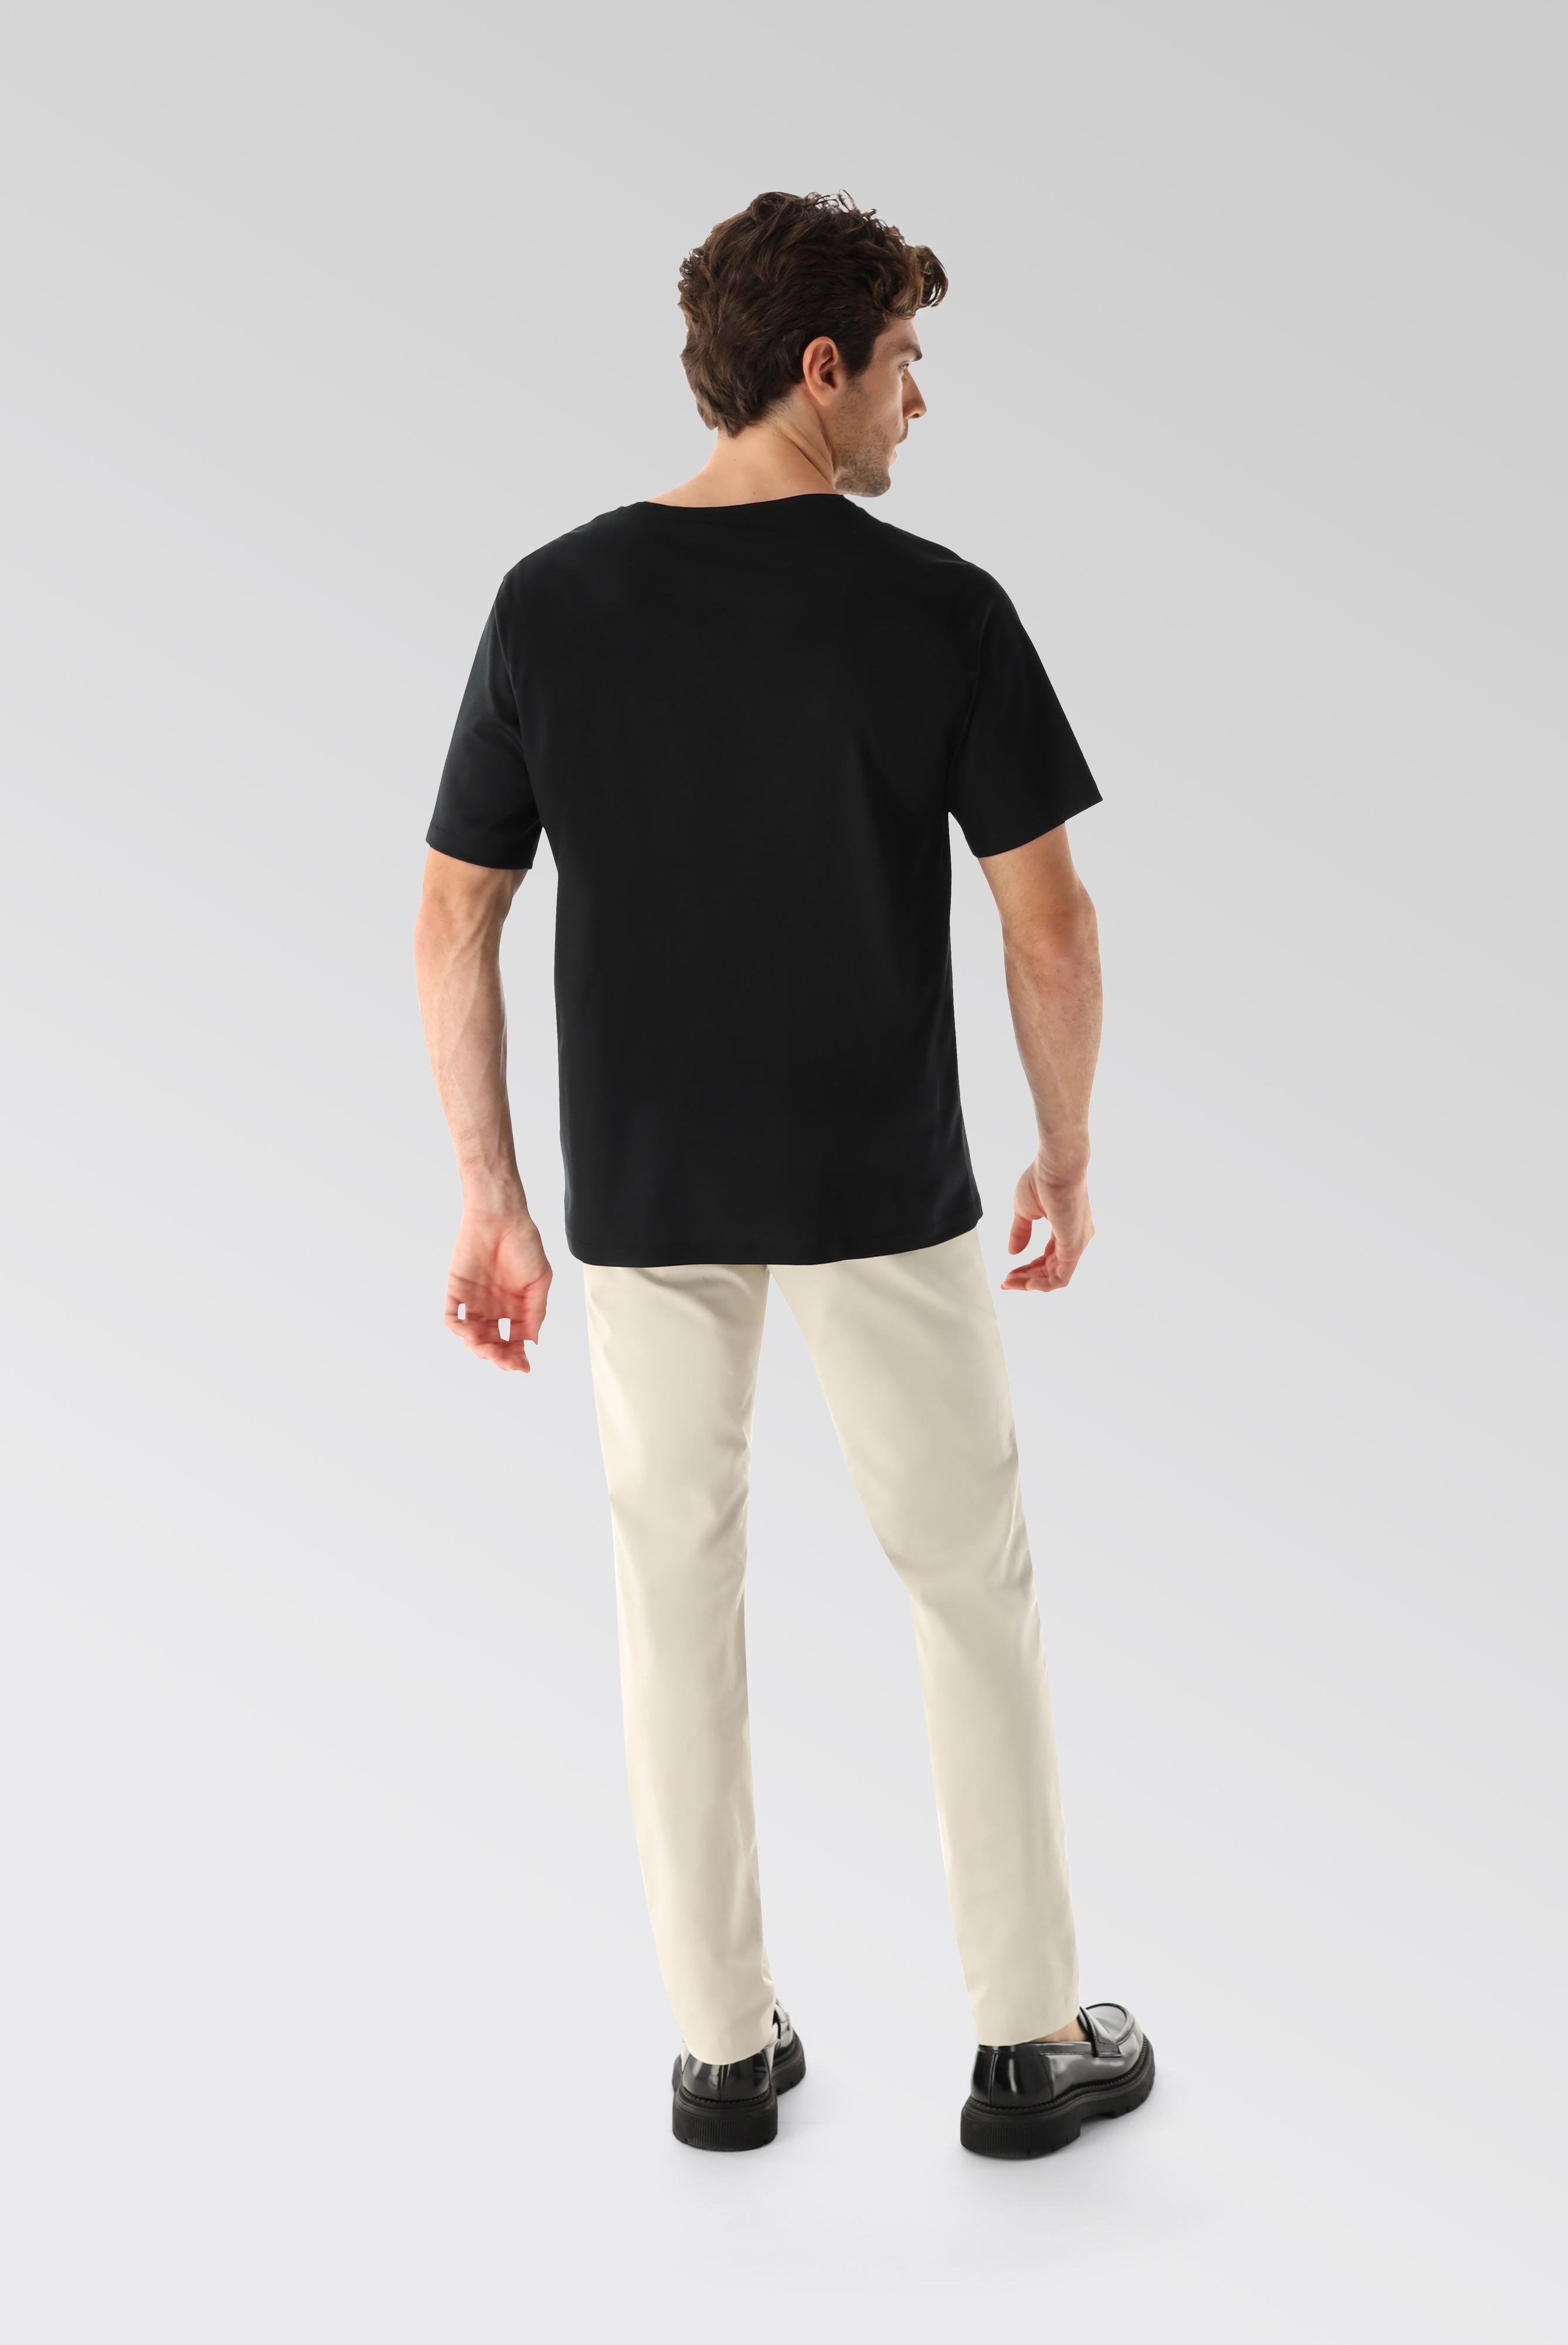 T-Shirts+Oversize Jersey T-Shirt with a Chest Pocket+20.1776.GZ.180031.099.S